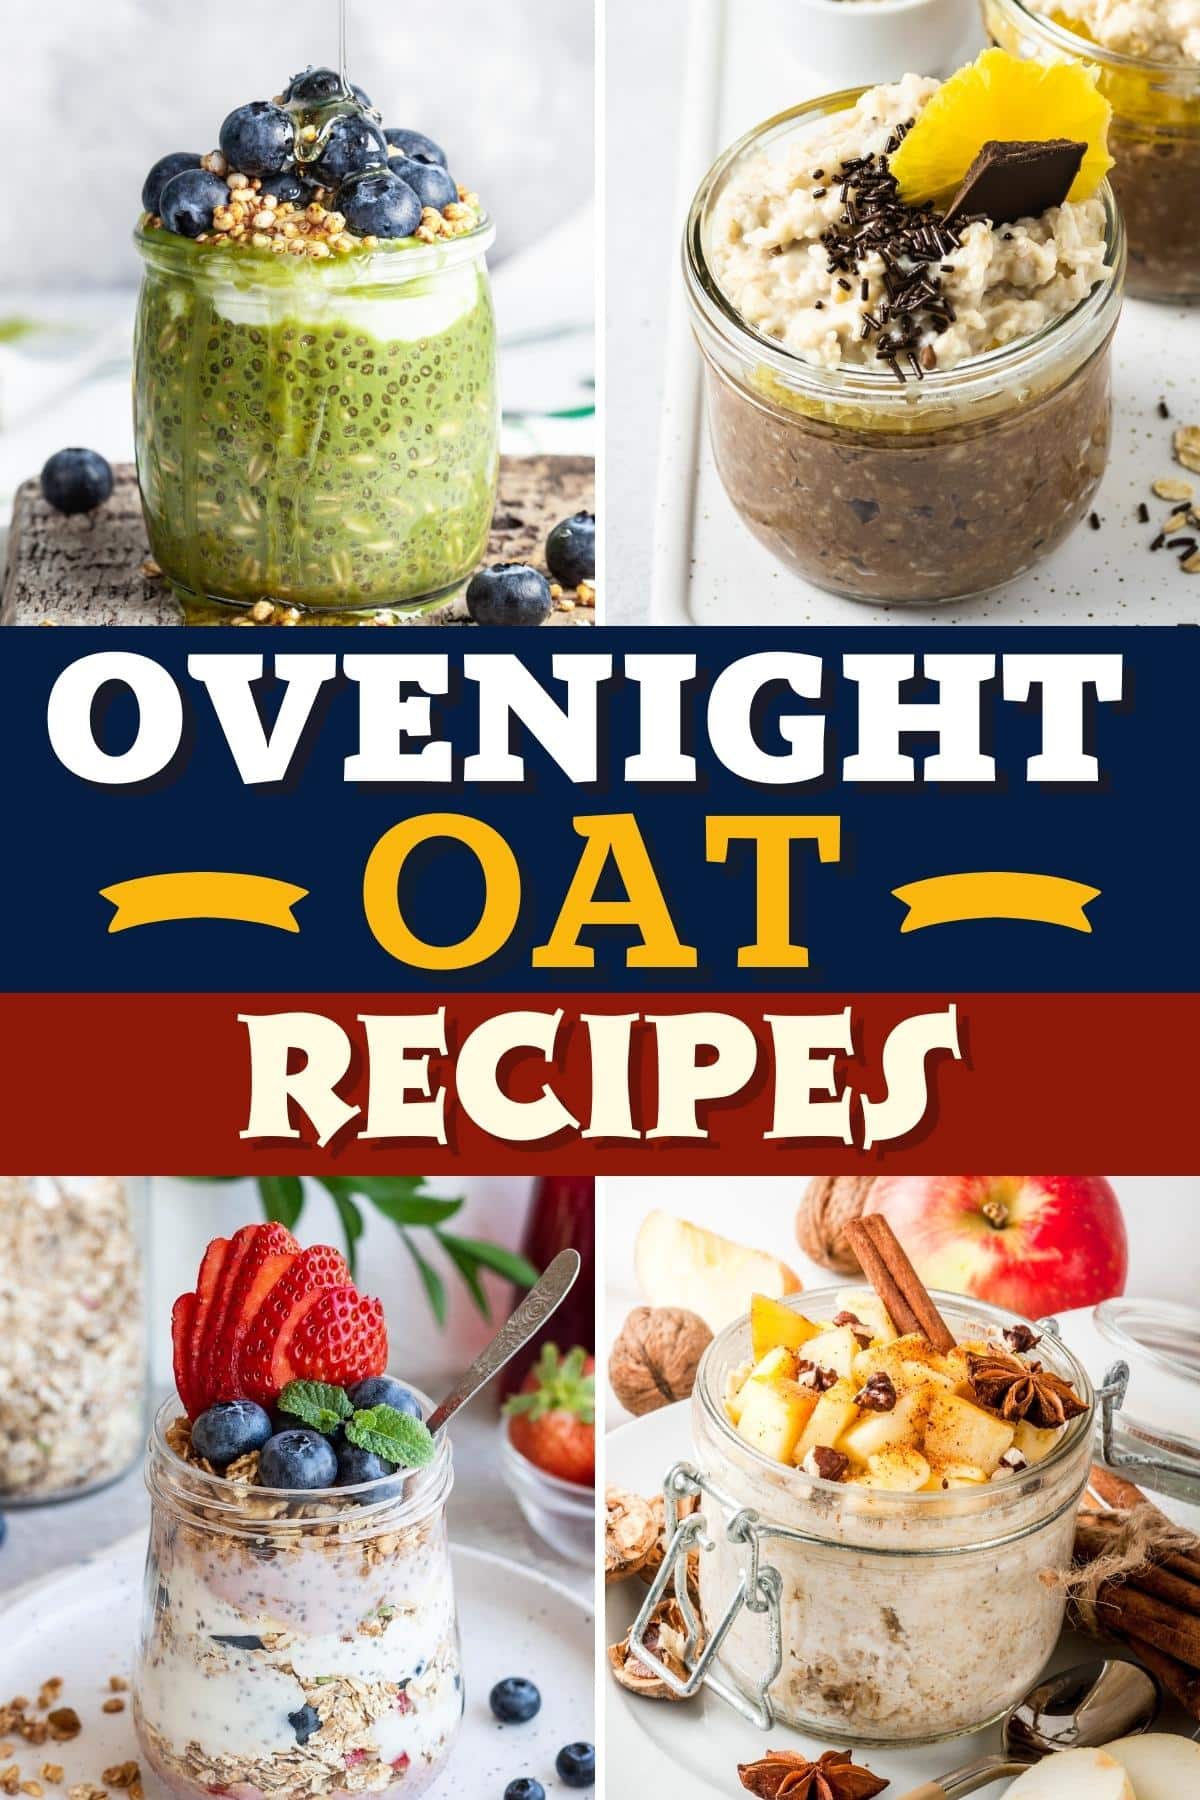 16 Easy Overnight Oat Recipes (+ Best Flavors) - Insanely Good